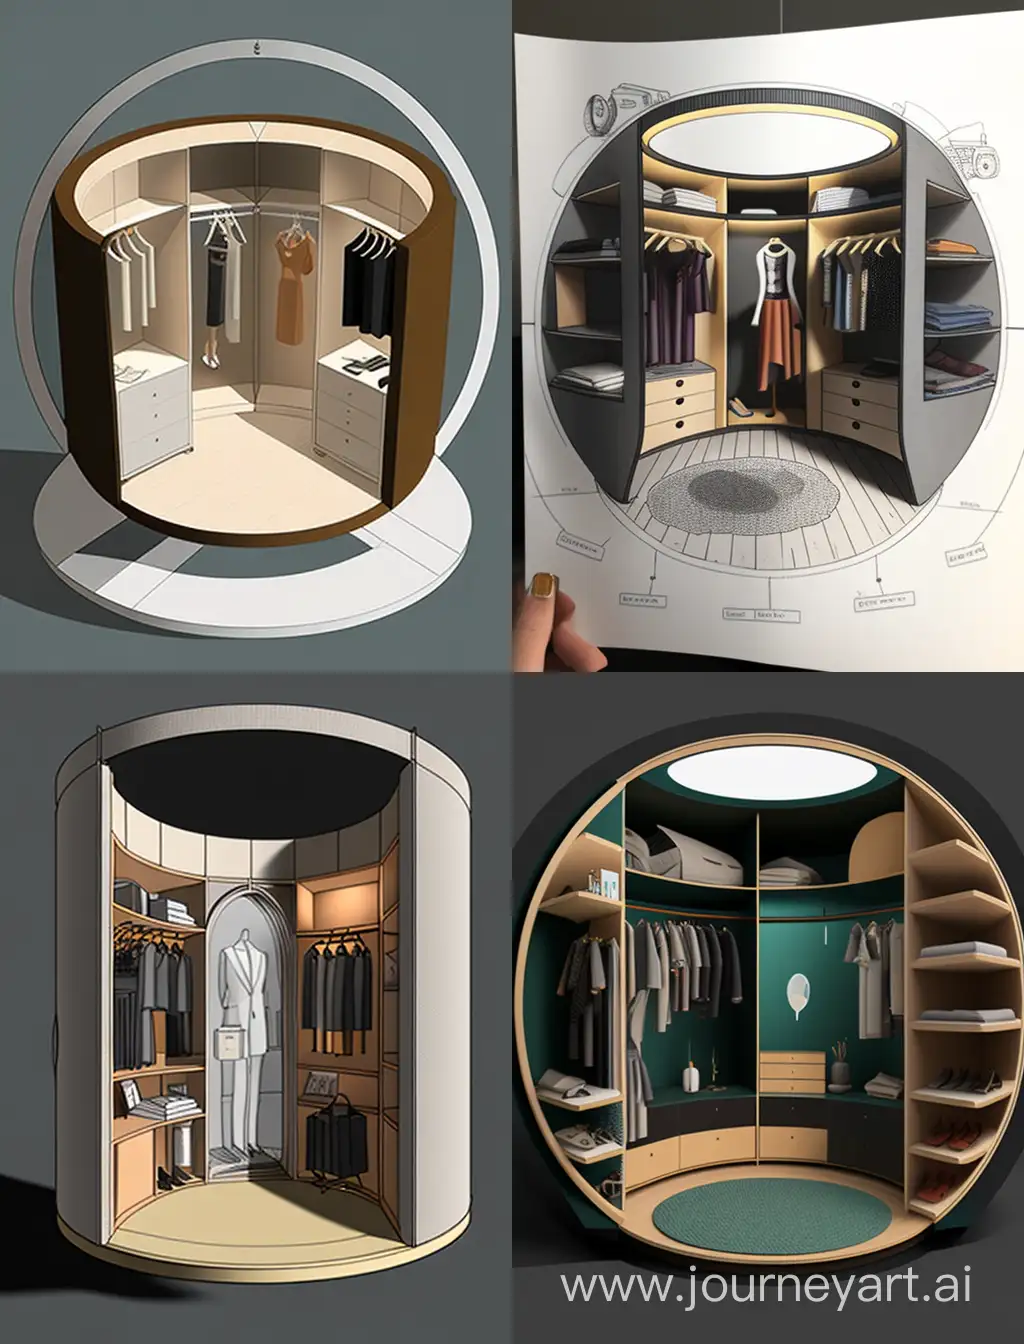 Futuristic-SemiCircular-Smart-Wardrobe-with-VoiceActivated-Clothing-Display